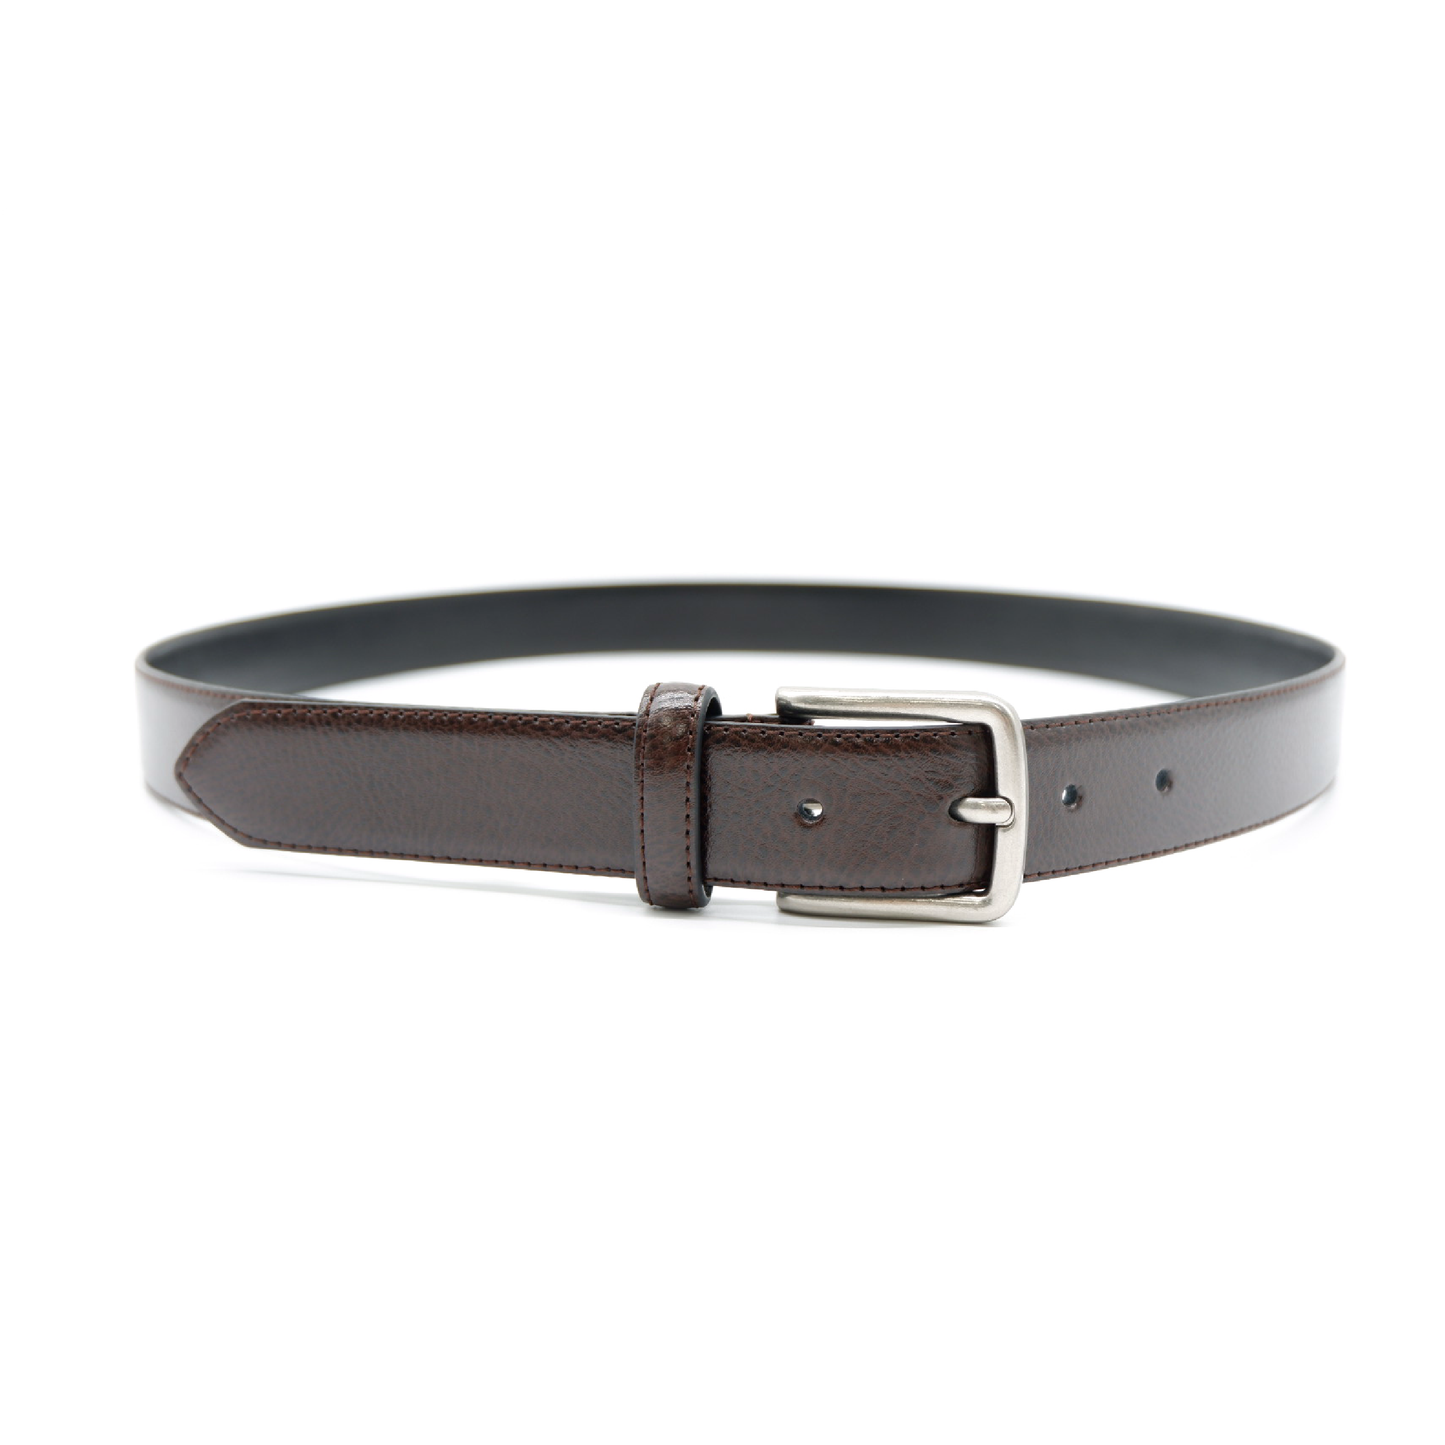 Jaivier - Brown Leather Belt – The Fitting Belt Company